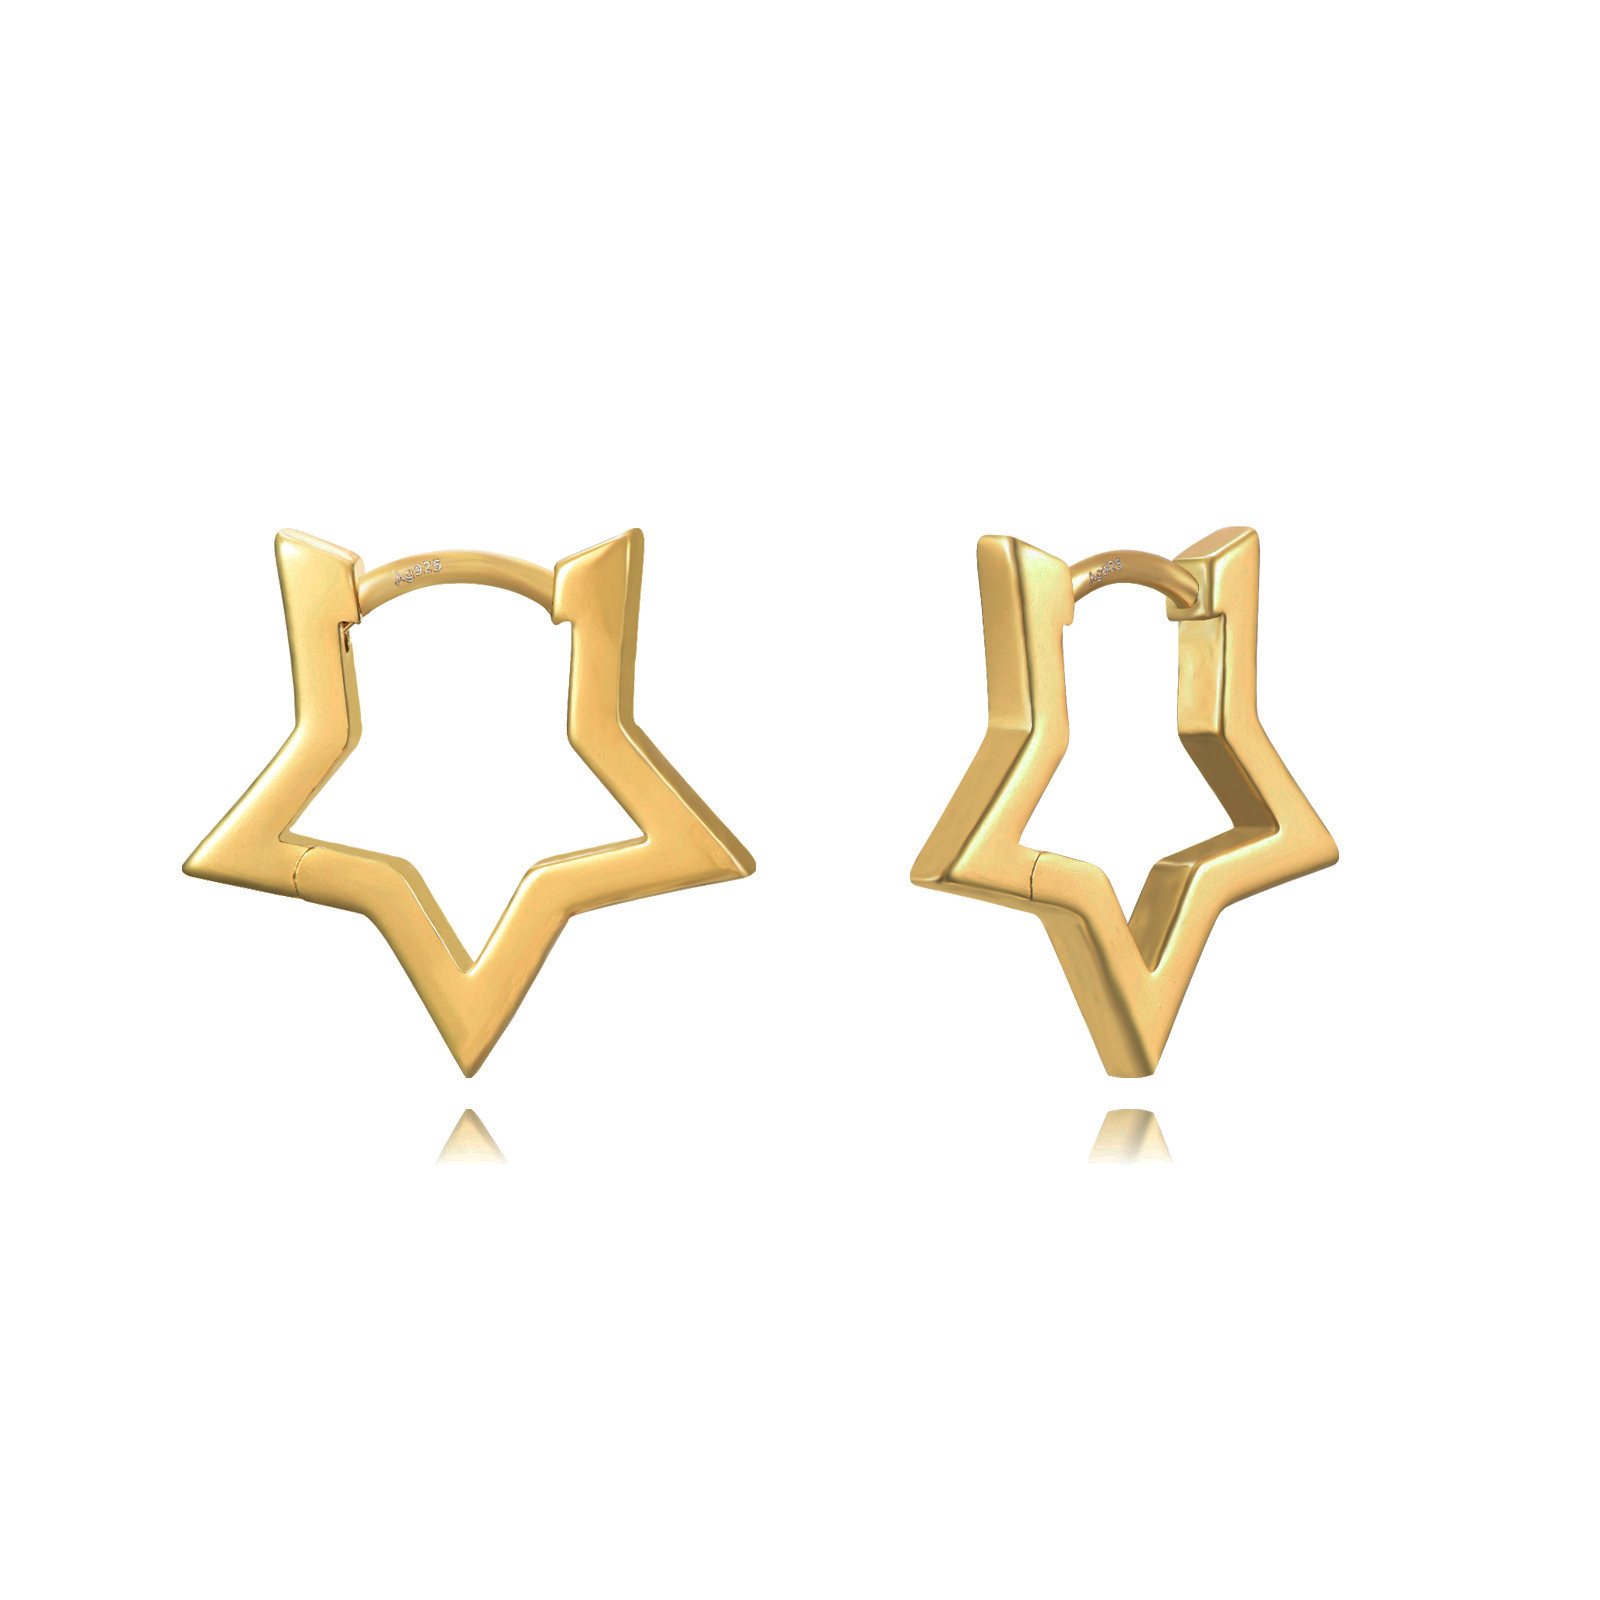 Silver Earrings Star Earrings - 15mm - Gold Plated Silver and Rhodium Silver